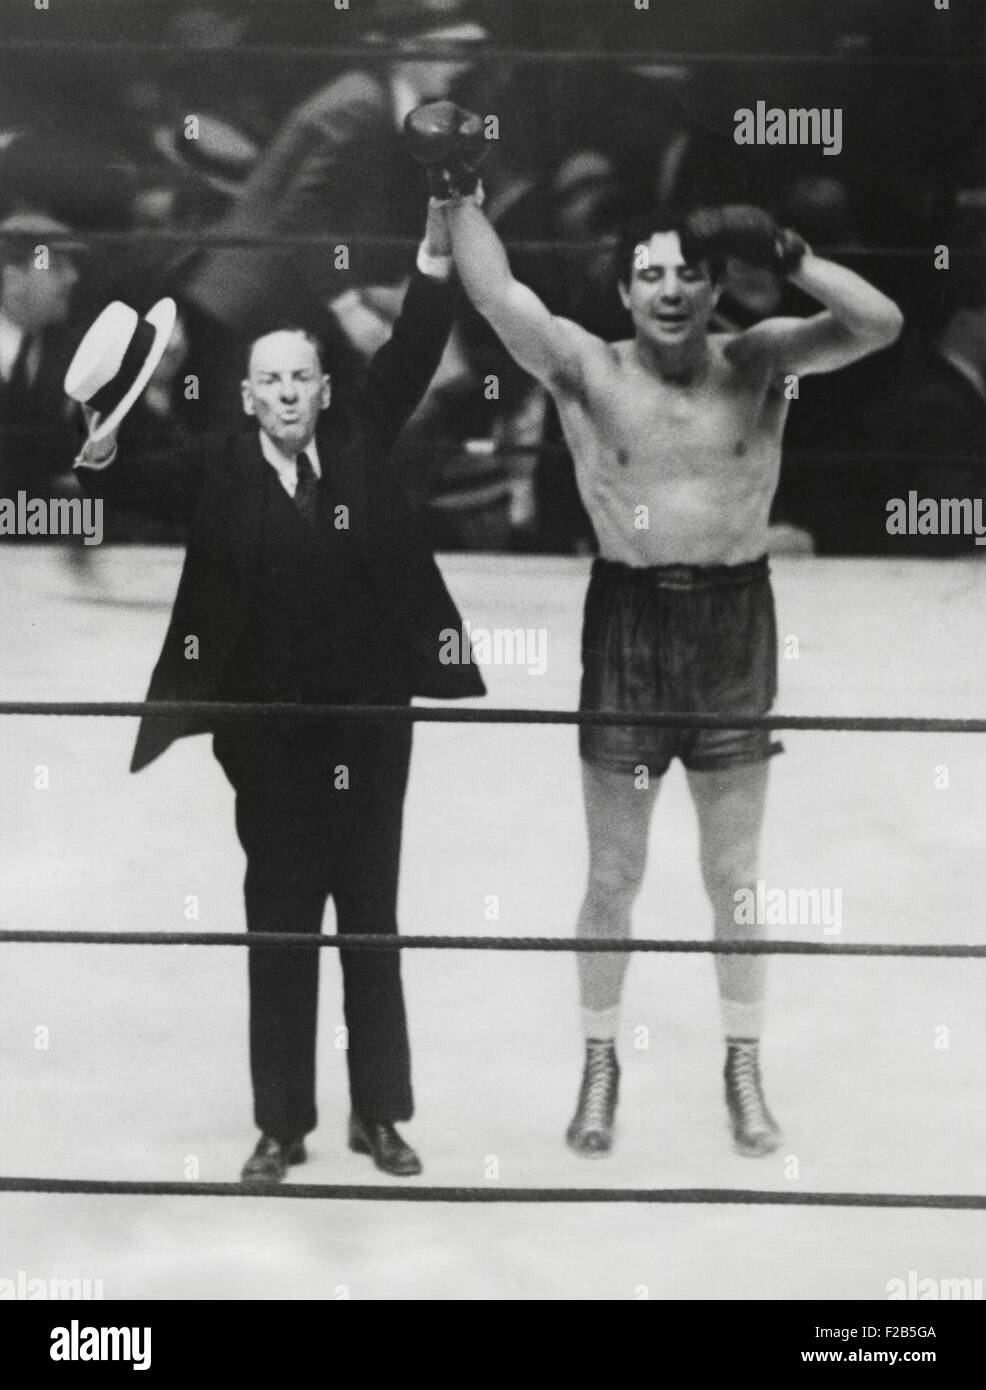 Victorious Max Baer's became the World's Heavyweight Champion after defeating Primo Carnera. June 14, 1934 - (BSLOC 2014 17 148) Stock Photo